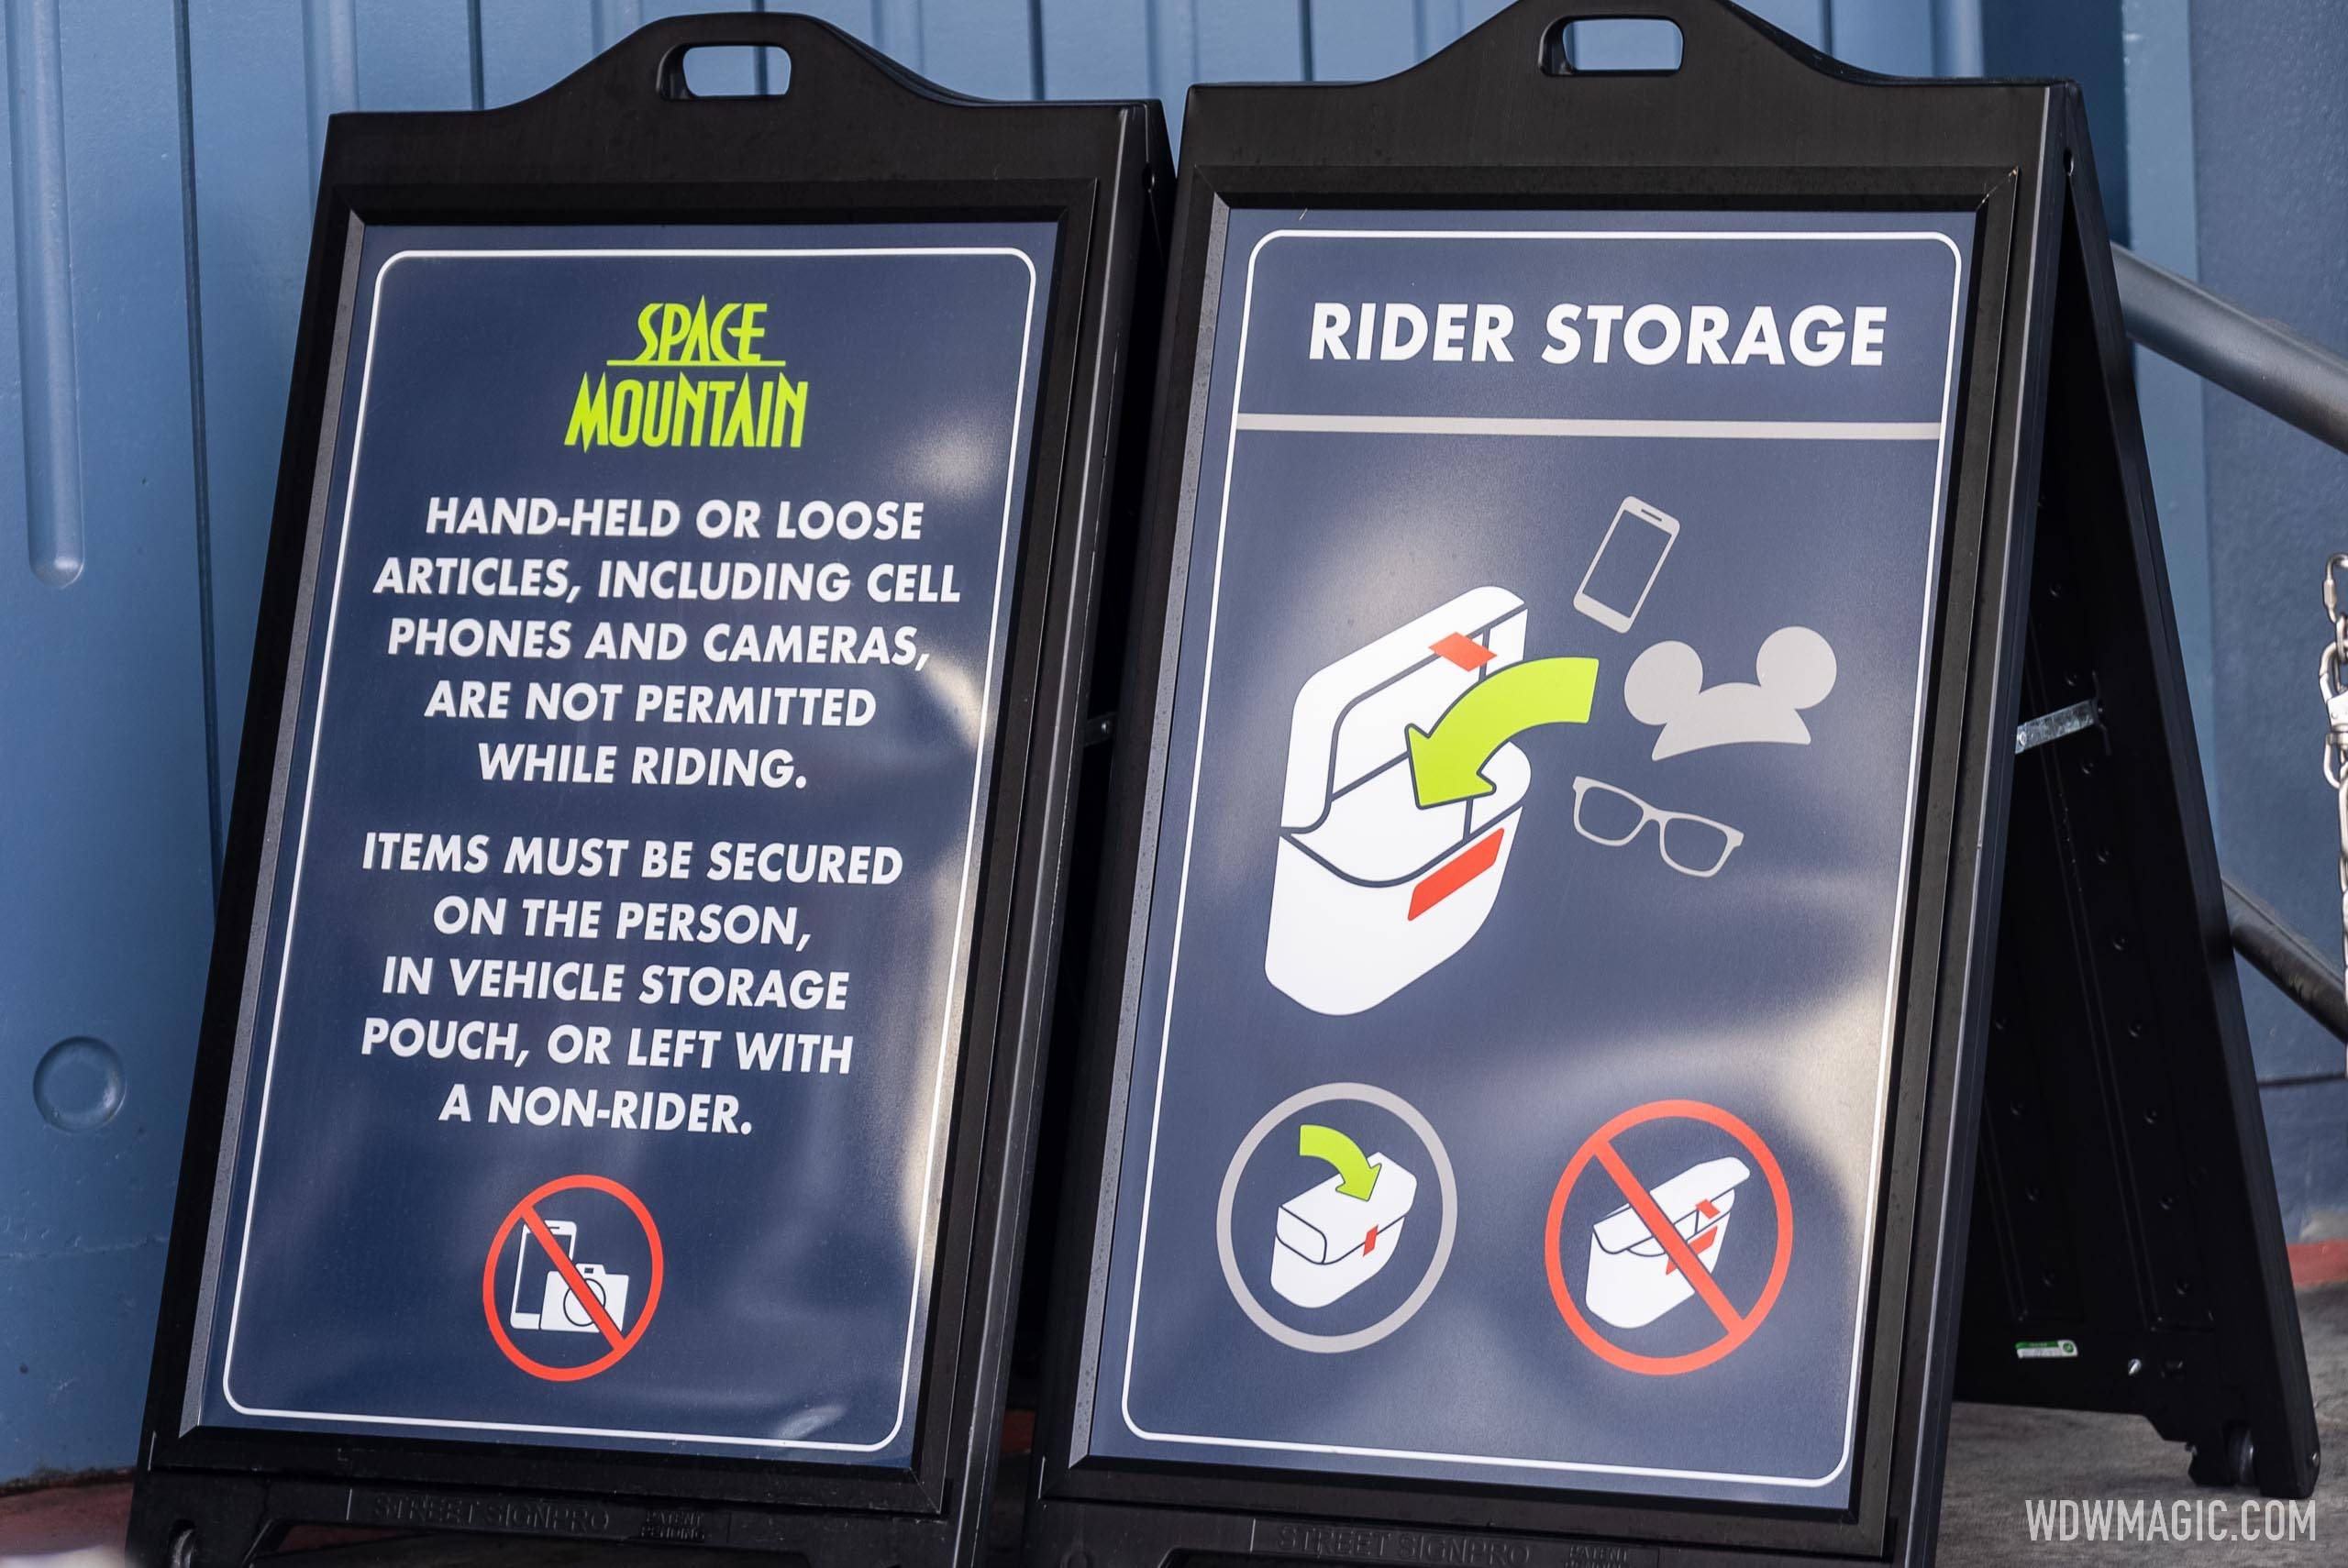 New rider rules on Space Mountain for hand-held items